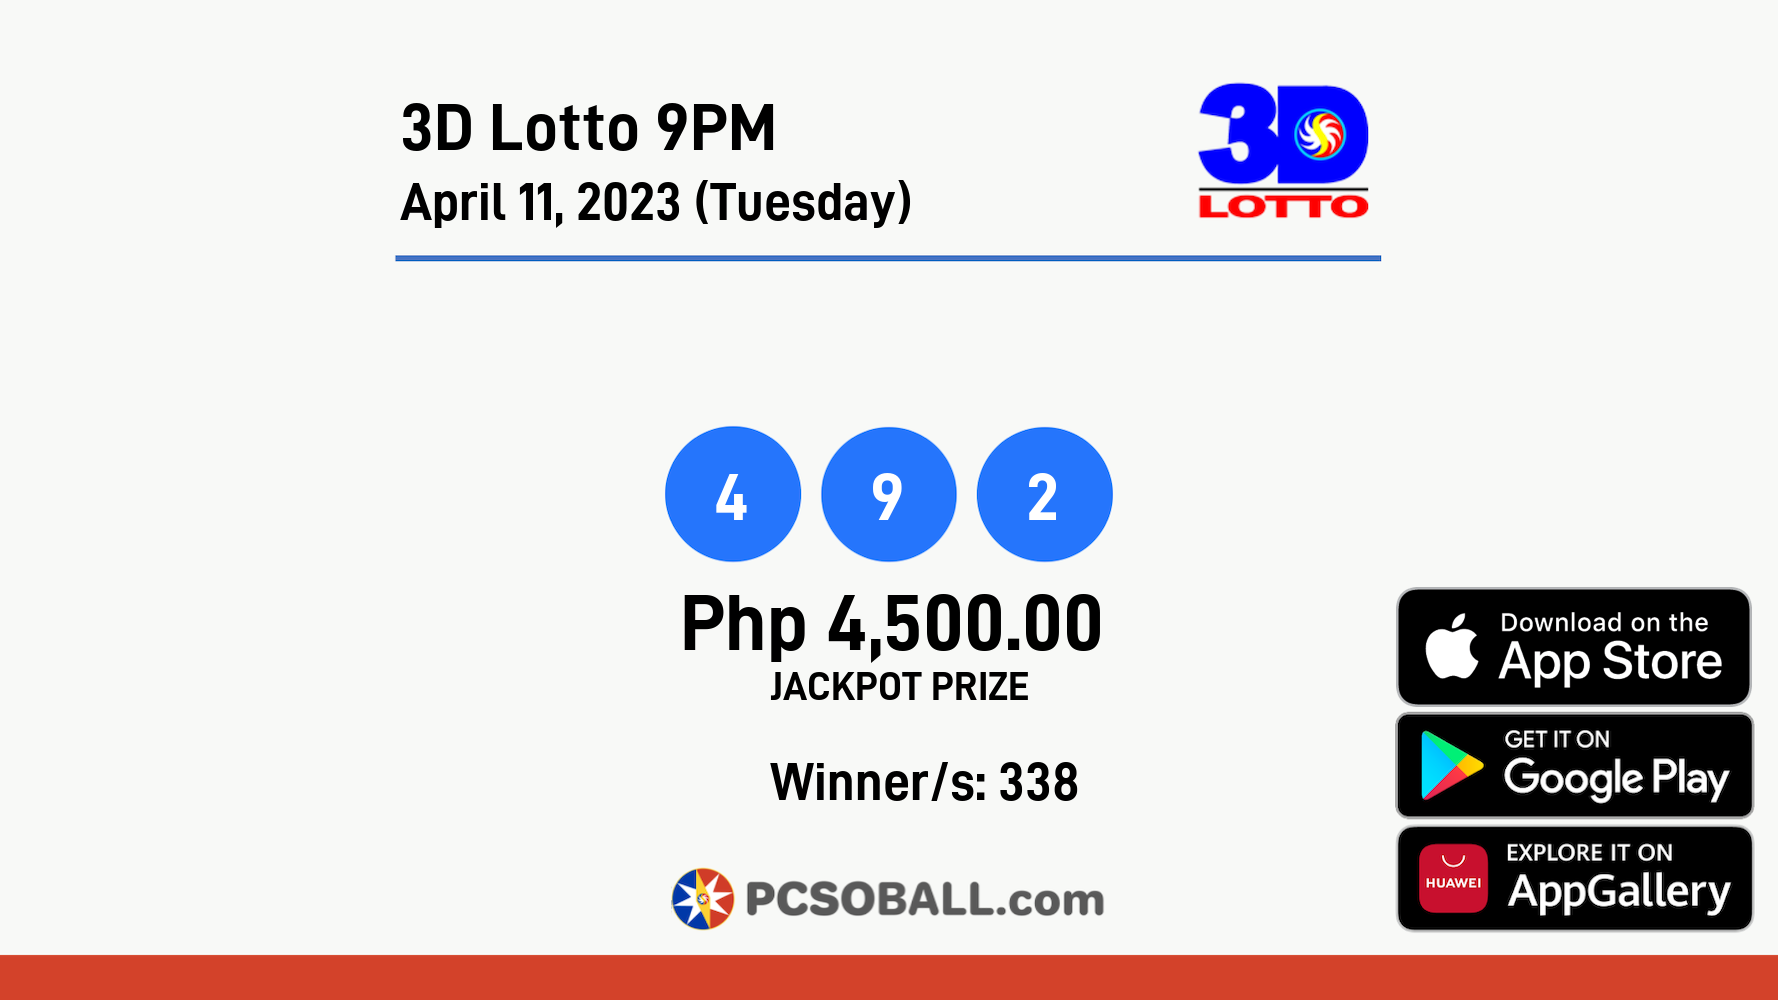 3D Lotto 9PM April 11, 2023 (Tuesday) Result